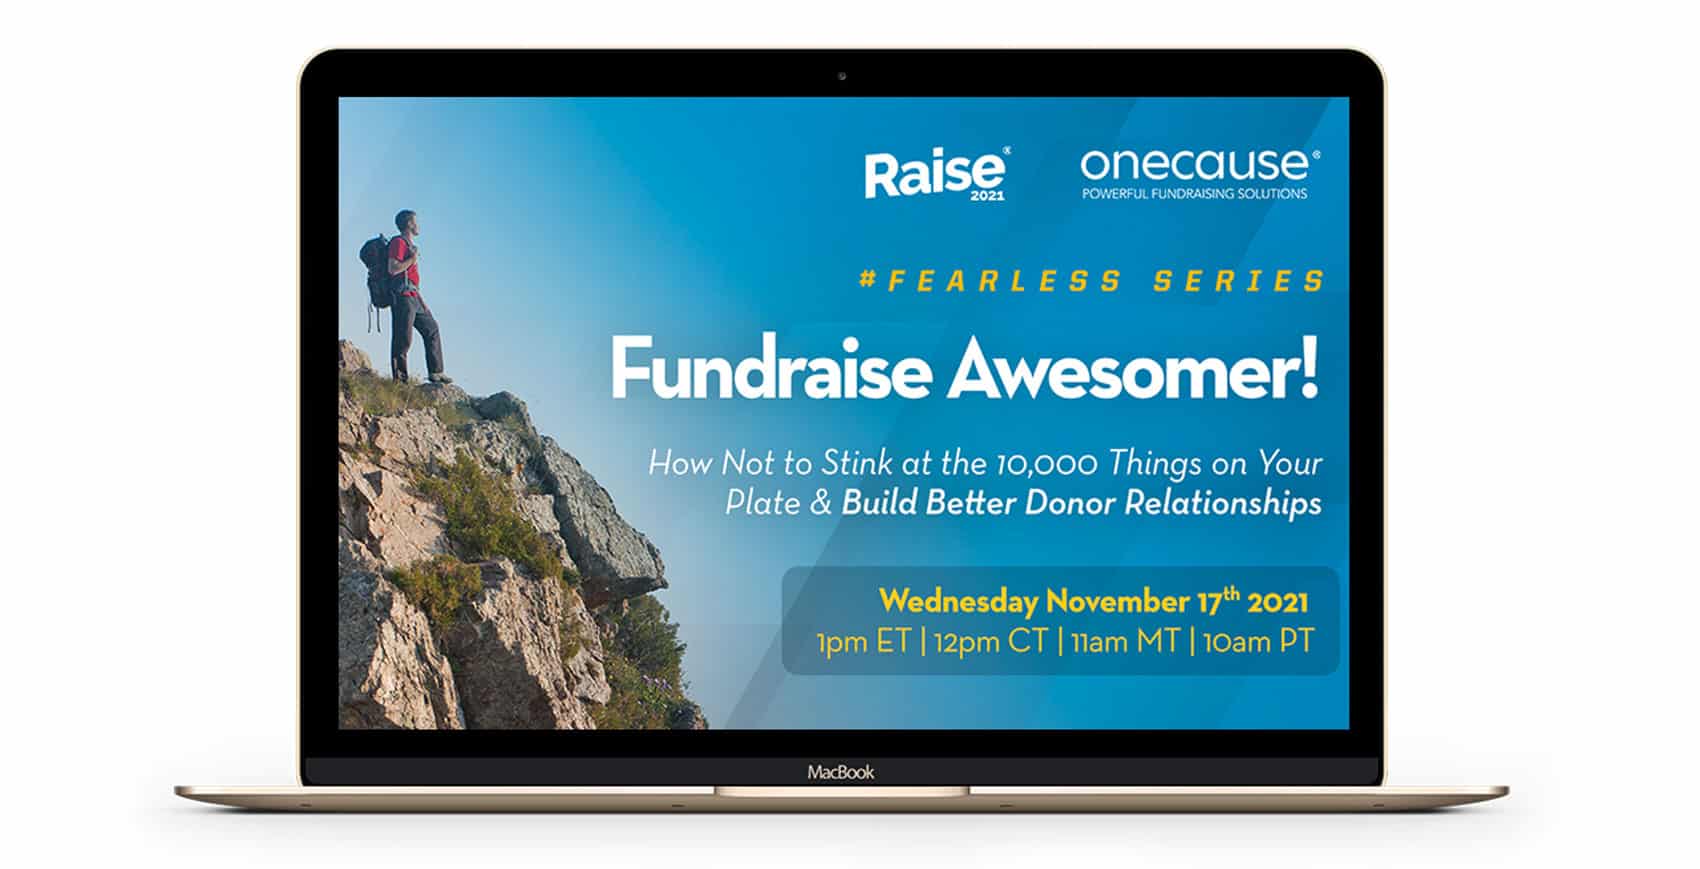 #Fearless Series: Fundraise Awesomer! How Not to Stink at the 10,000 Things on Your Plate & Build Better Donor Relationships-ipad